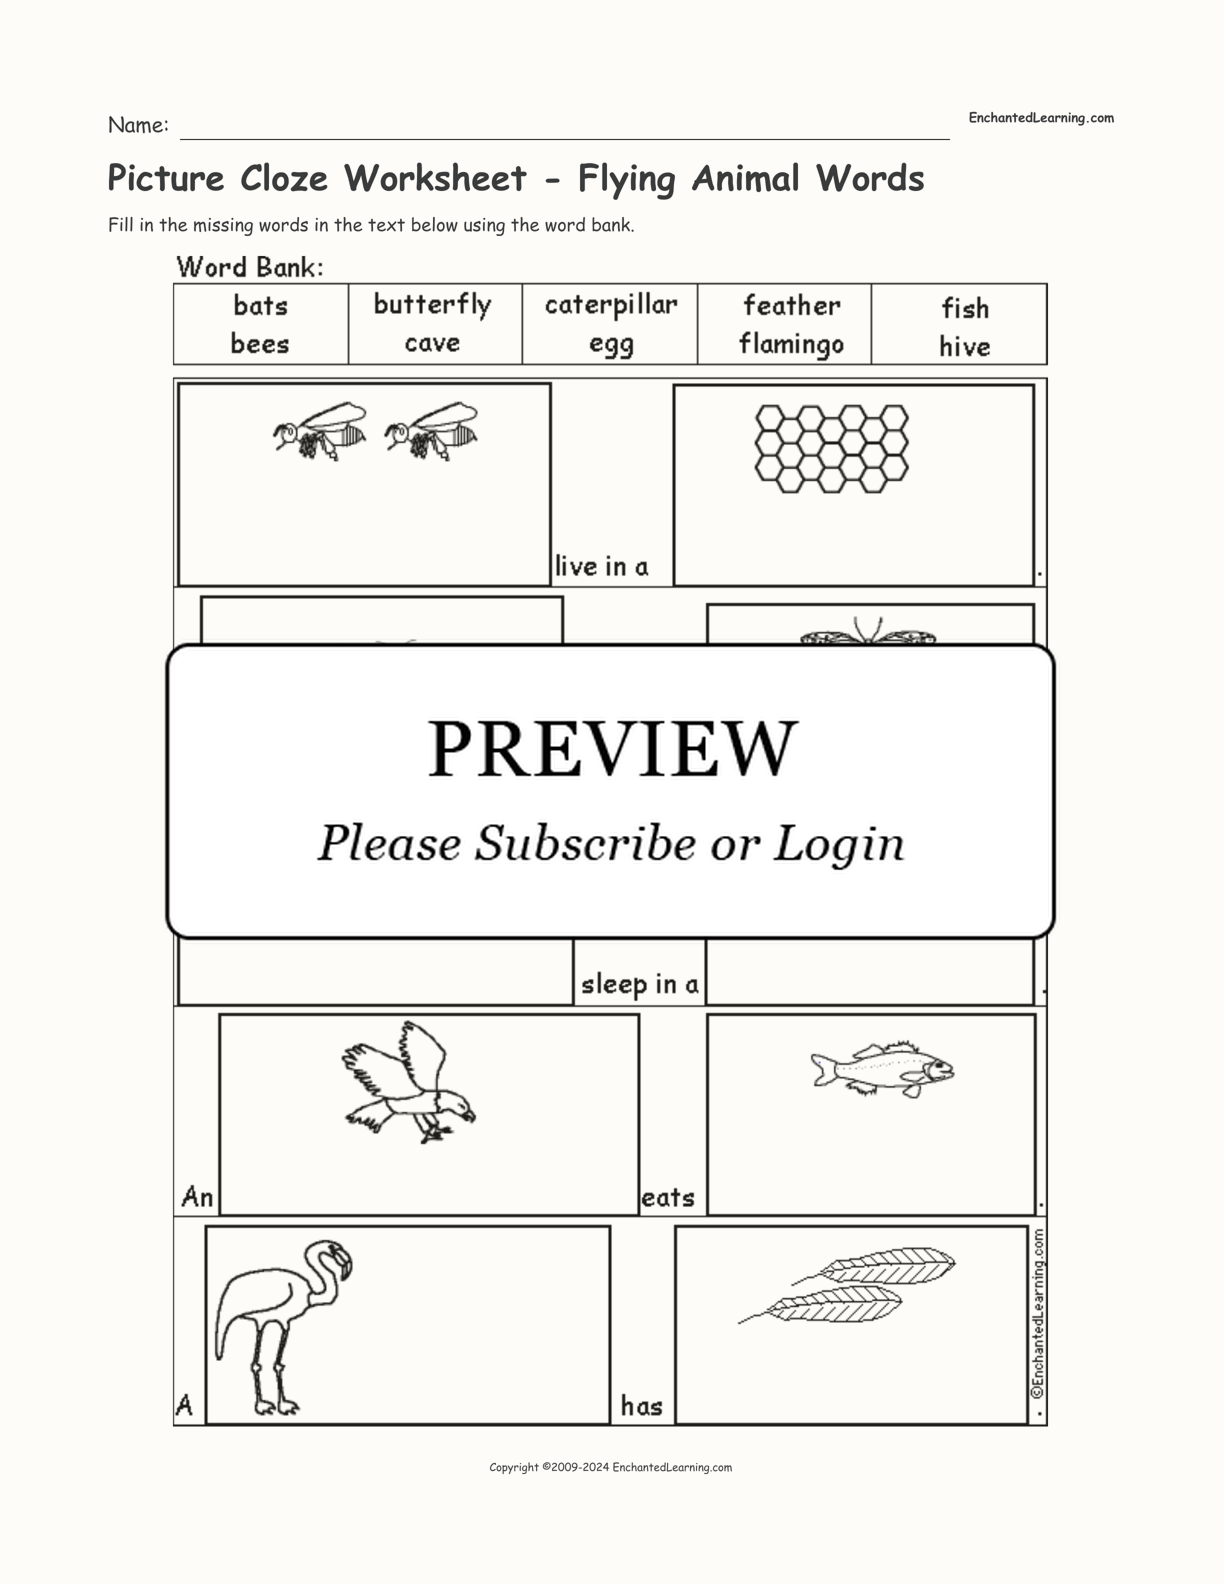 Picture Cloze Worksheet - Flying Animal Words interactive worksheet page 1